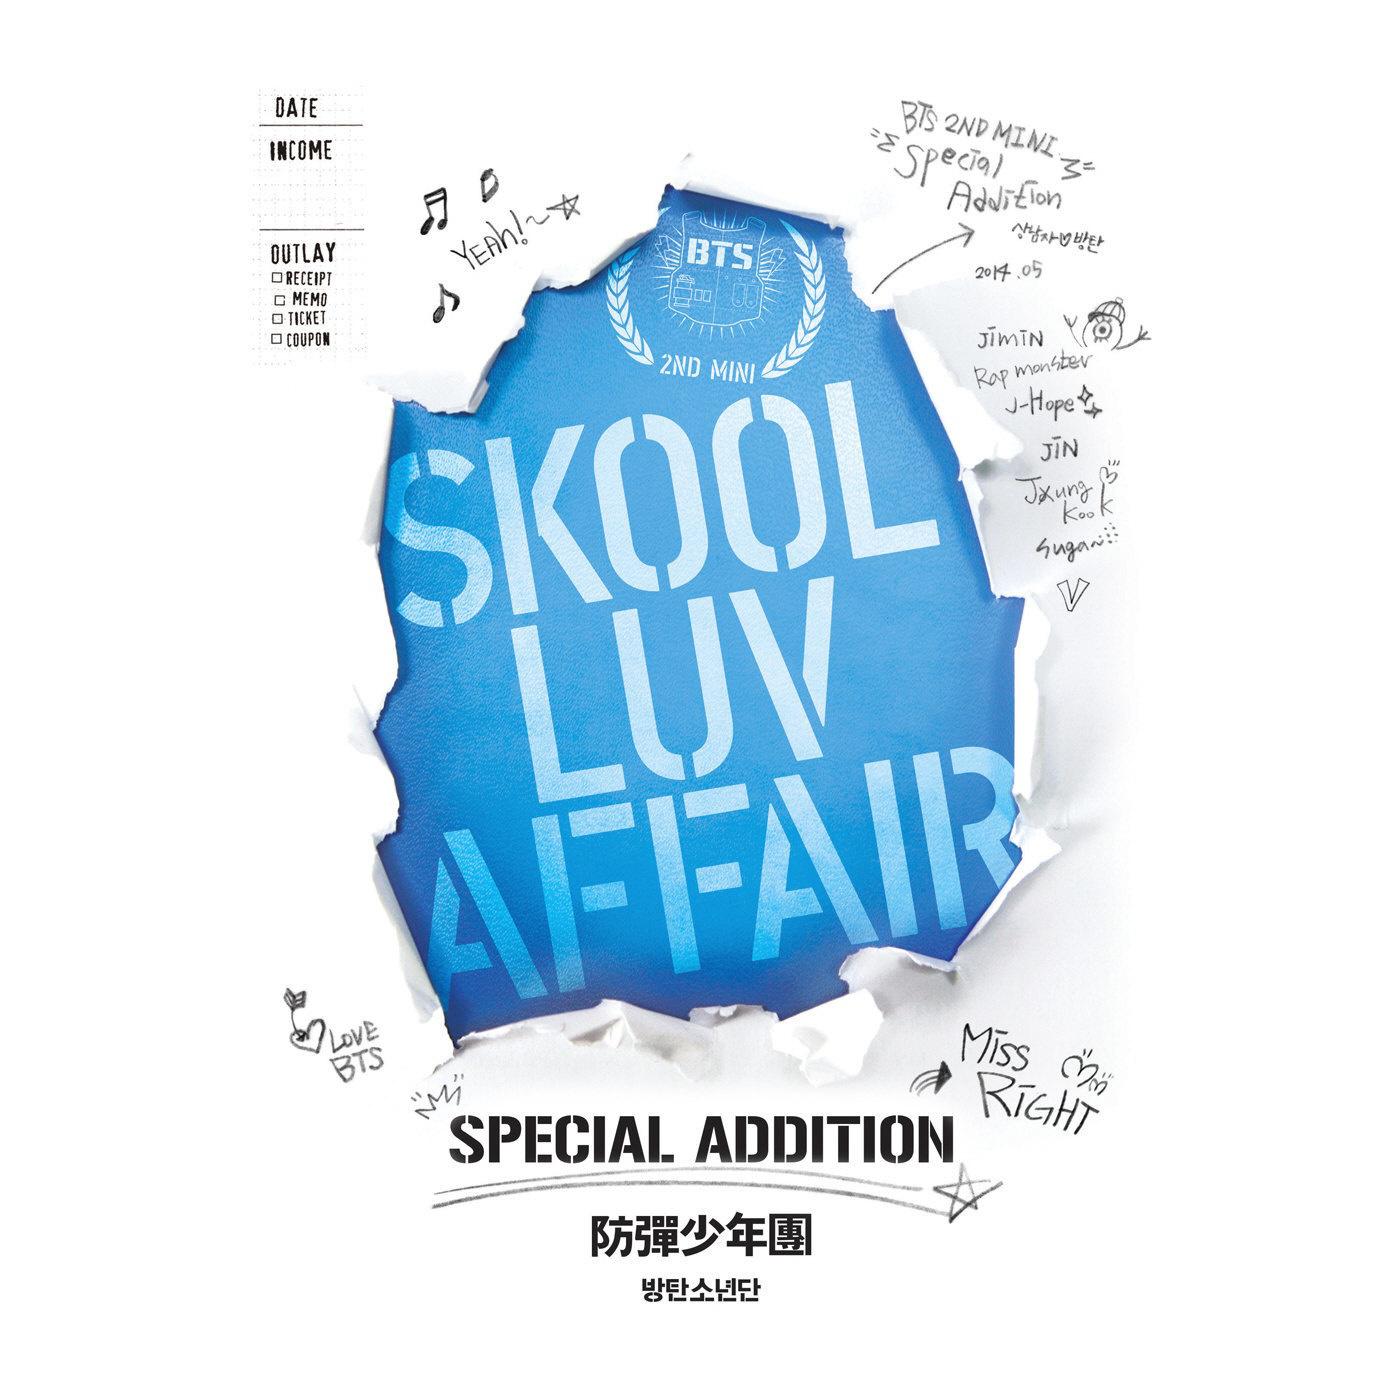 Where You From歌词 歌手BTS (防弹少年团)-专辑Skool Luv Affair Special Addition-单曲《Where You From》LRC歌词下载